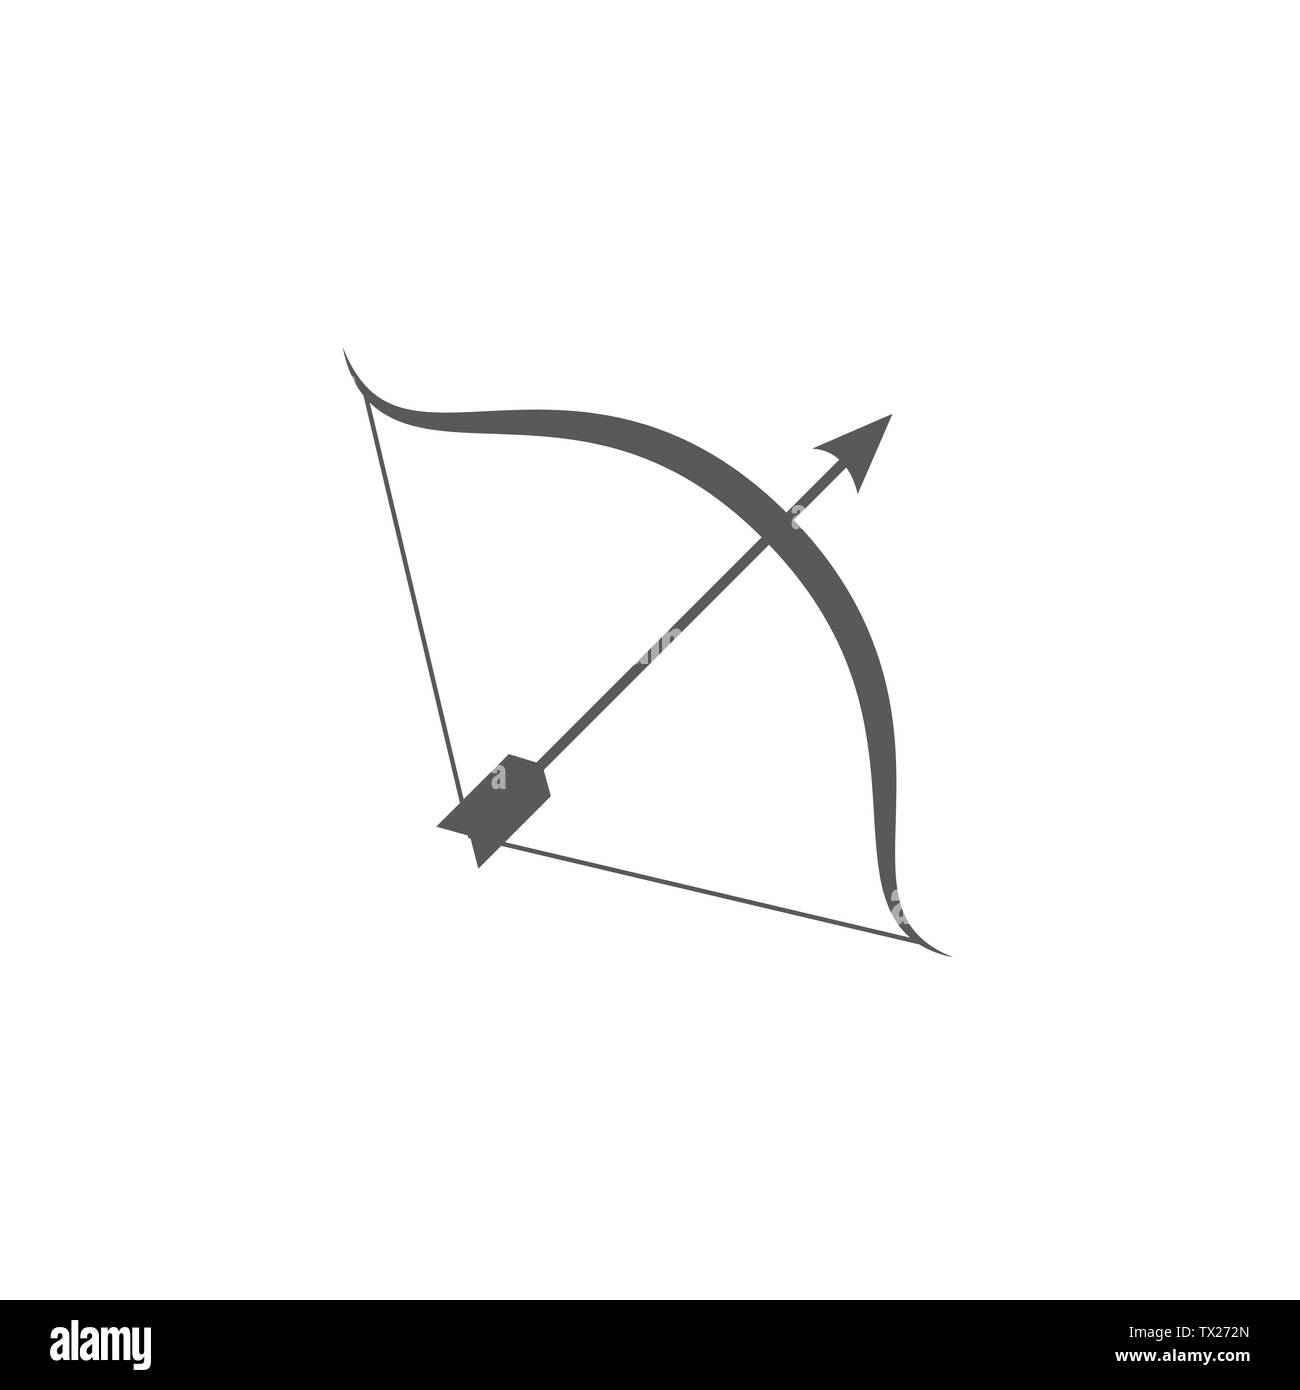 Bow and arrow icon on white background Stock Vector